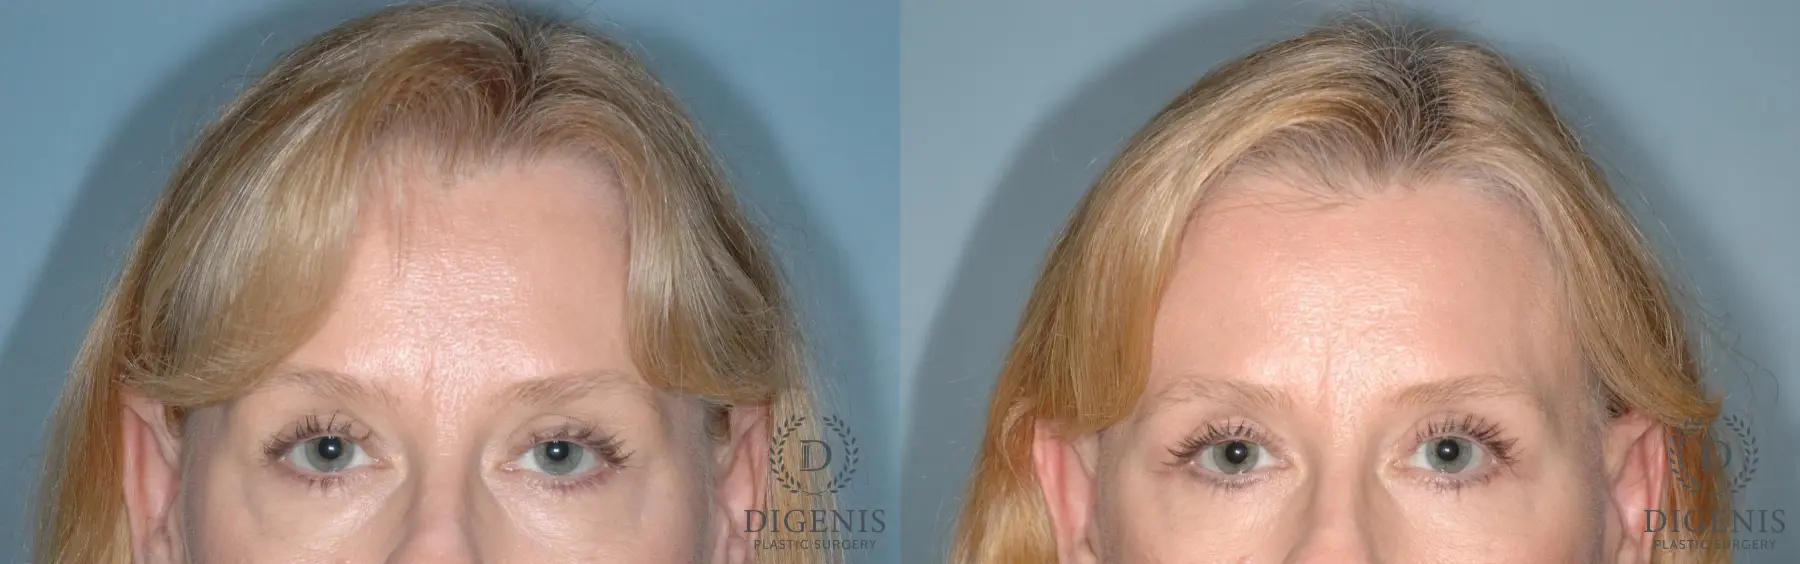 Eyelid Surgery: Patient 8 - Before and After  